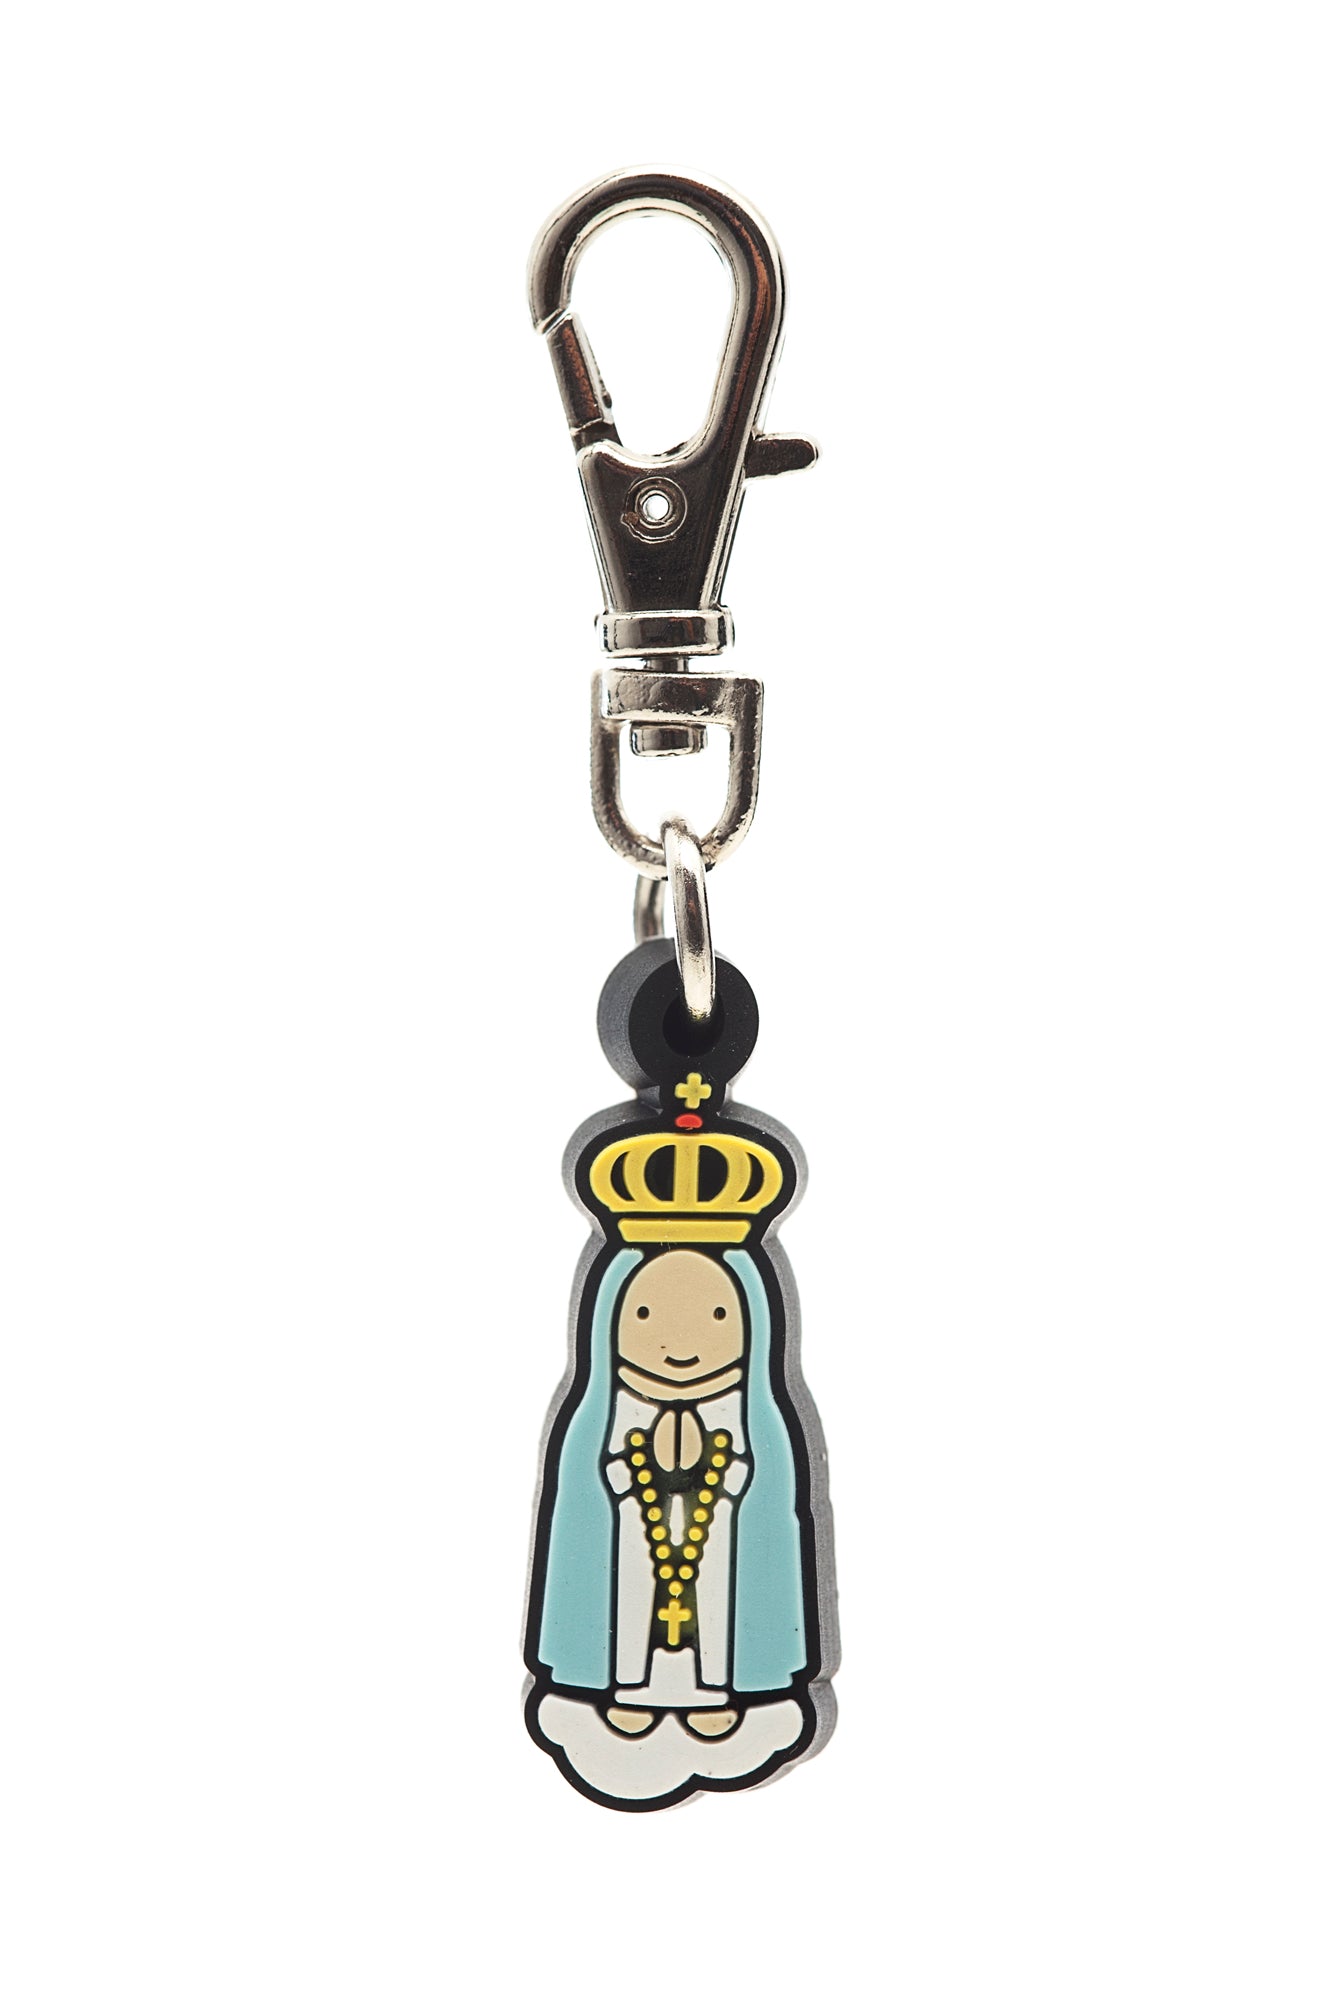 Our Lady of Fatima charm